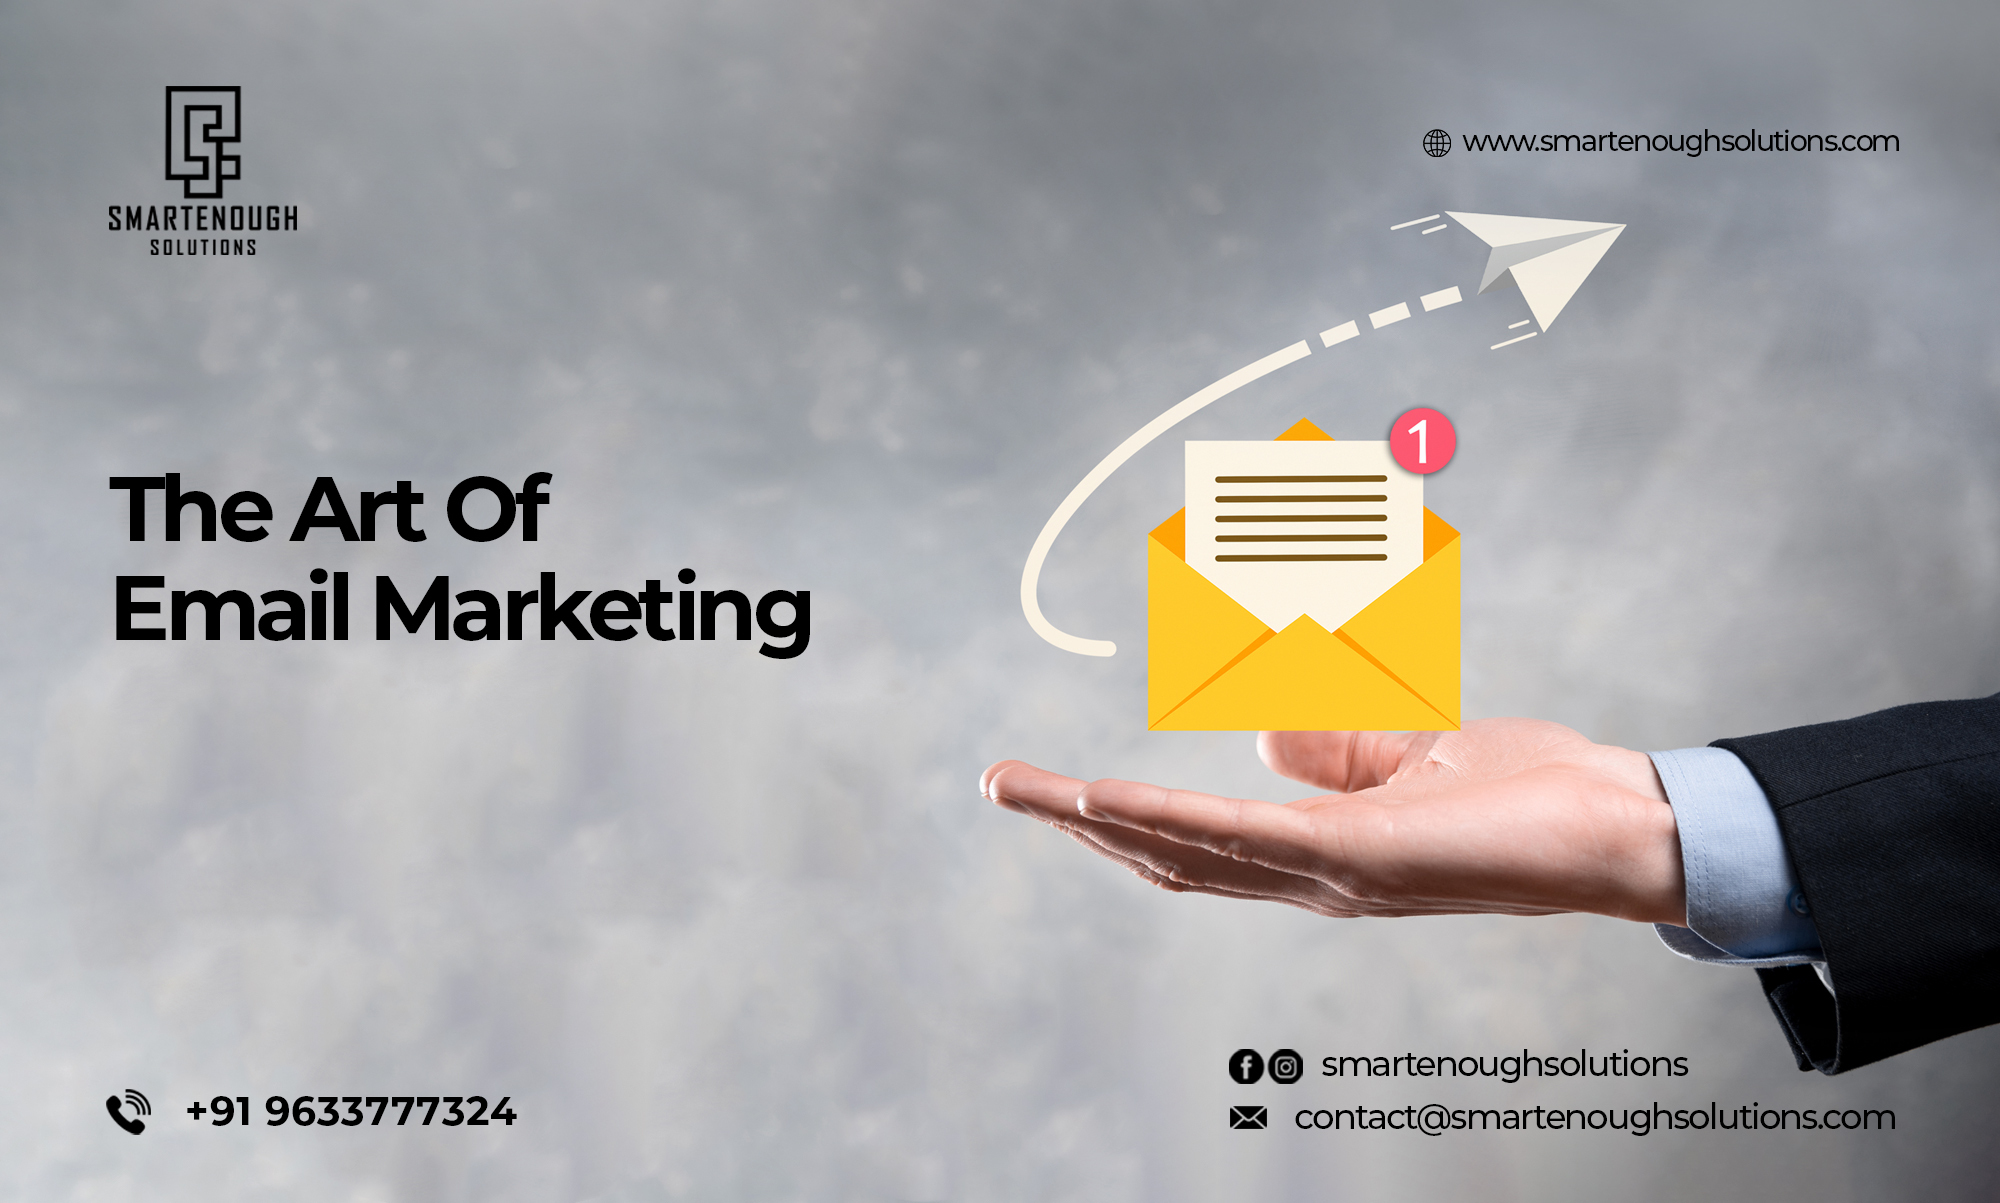 THE ART OF EMAIL MARKETING